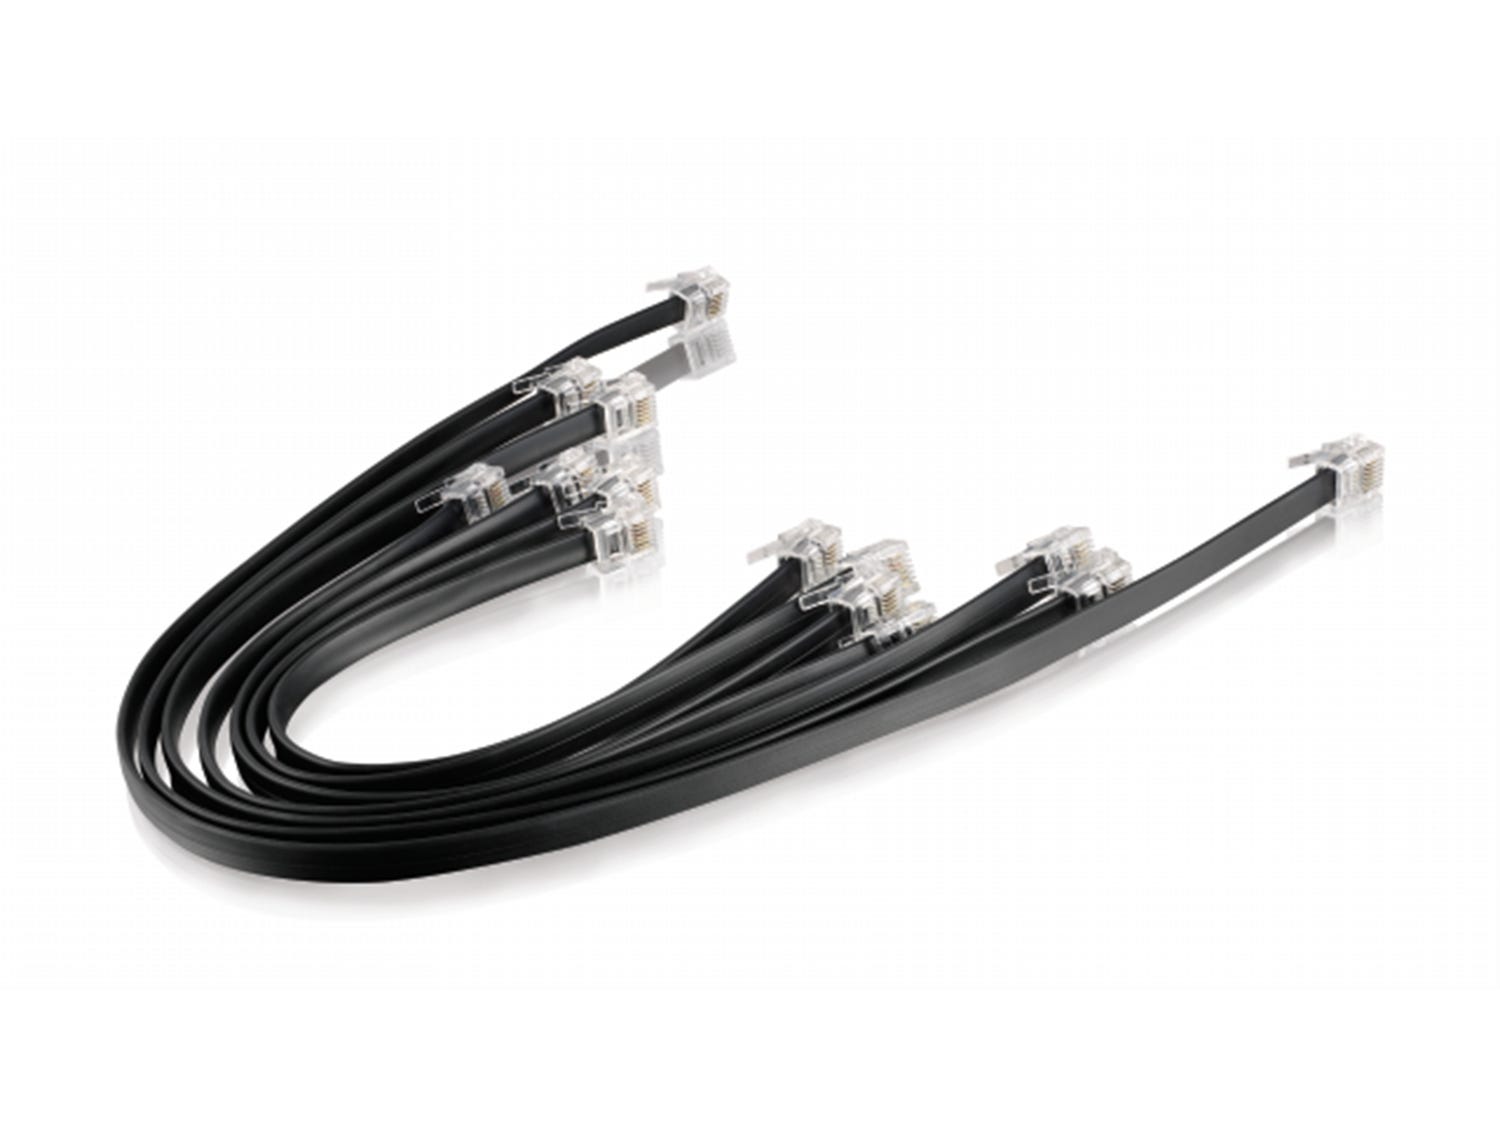 EV3 Cable Pack